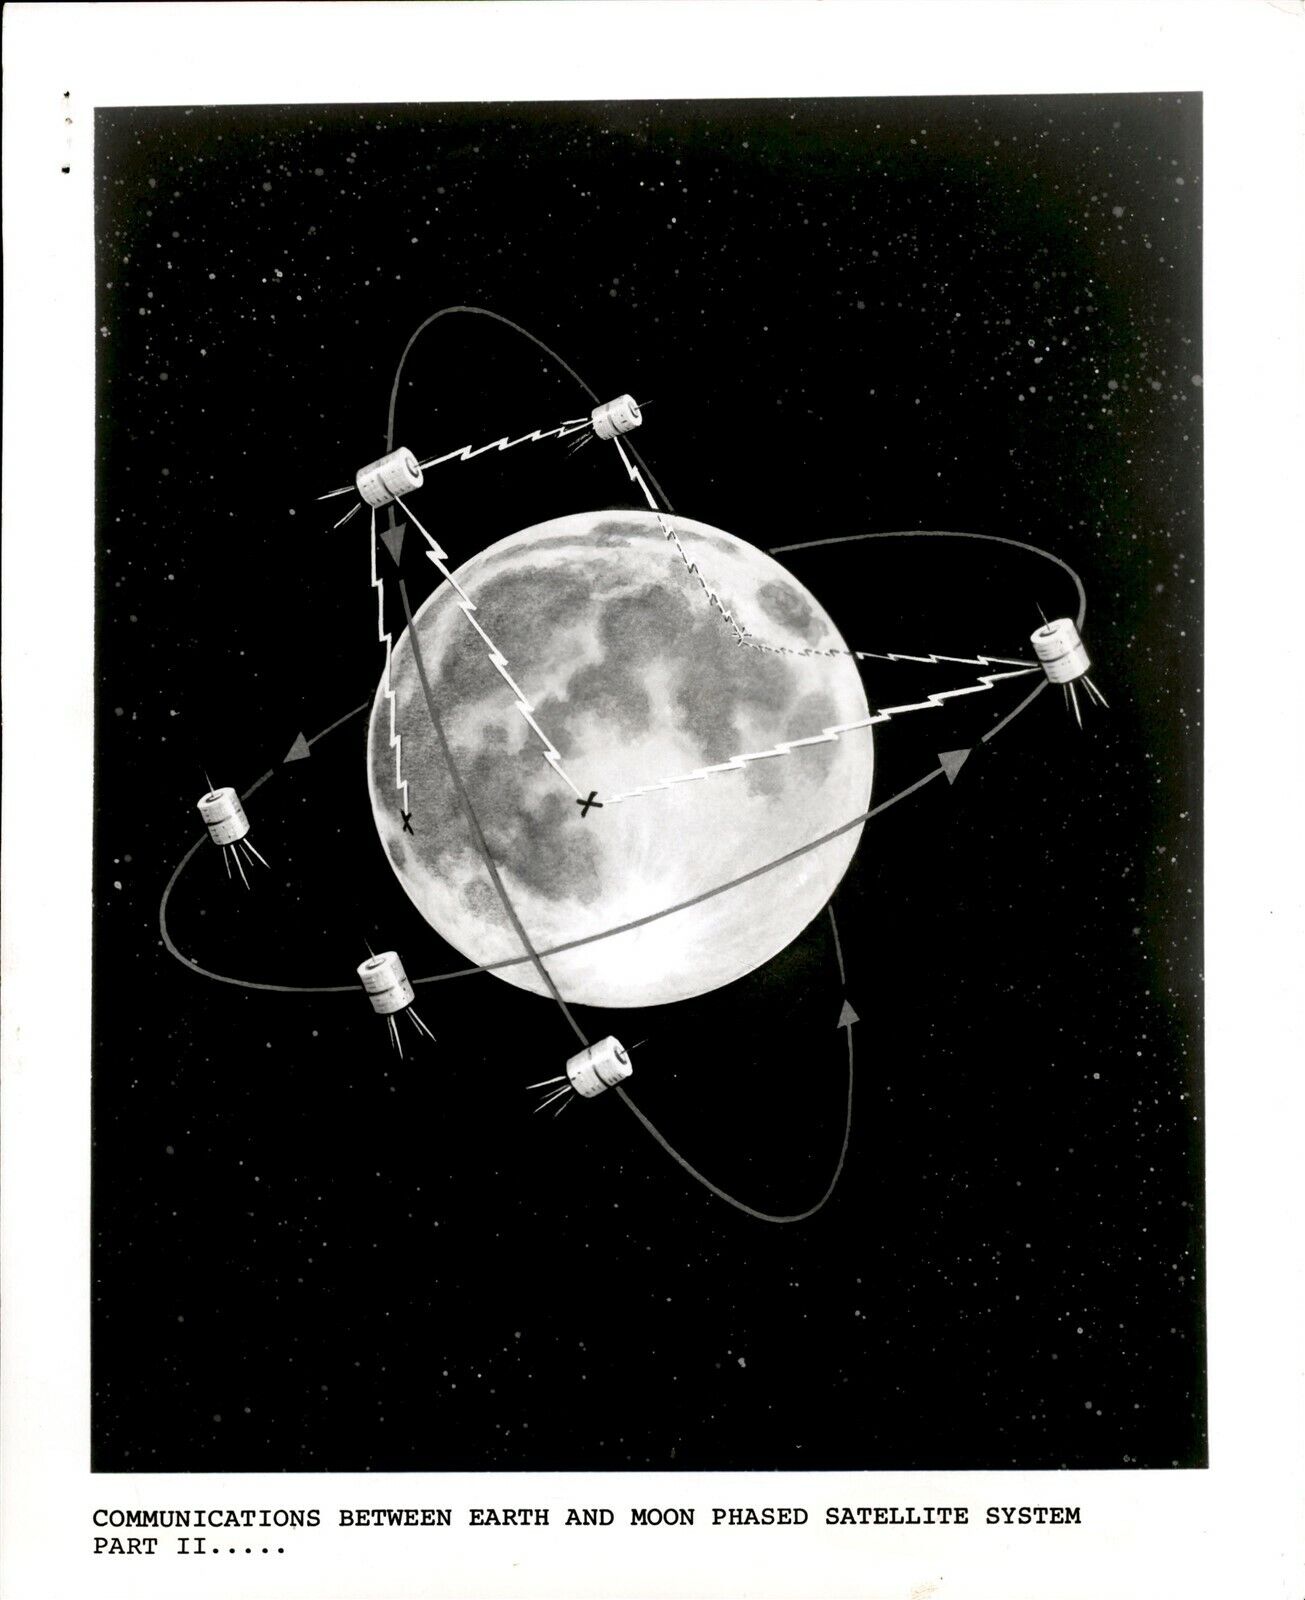 LG933 1970 Original Photo COMMUNICATIONS BETWEEN EARTH AND MOON Phased Satellite